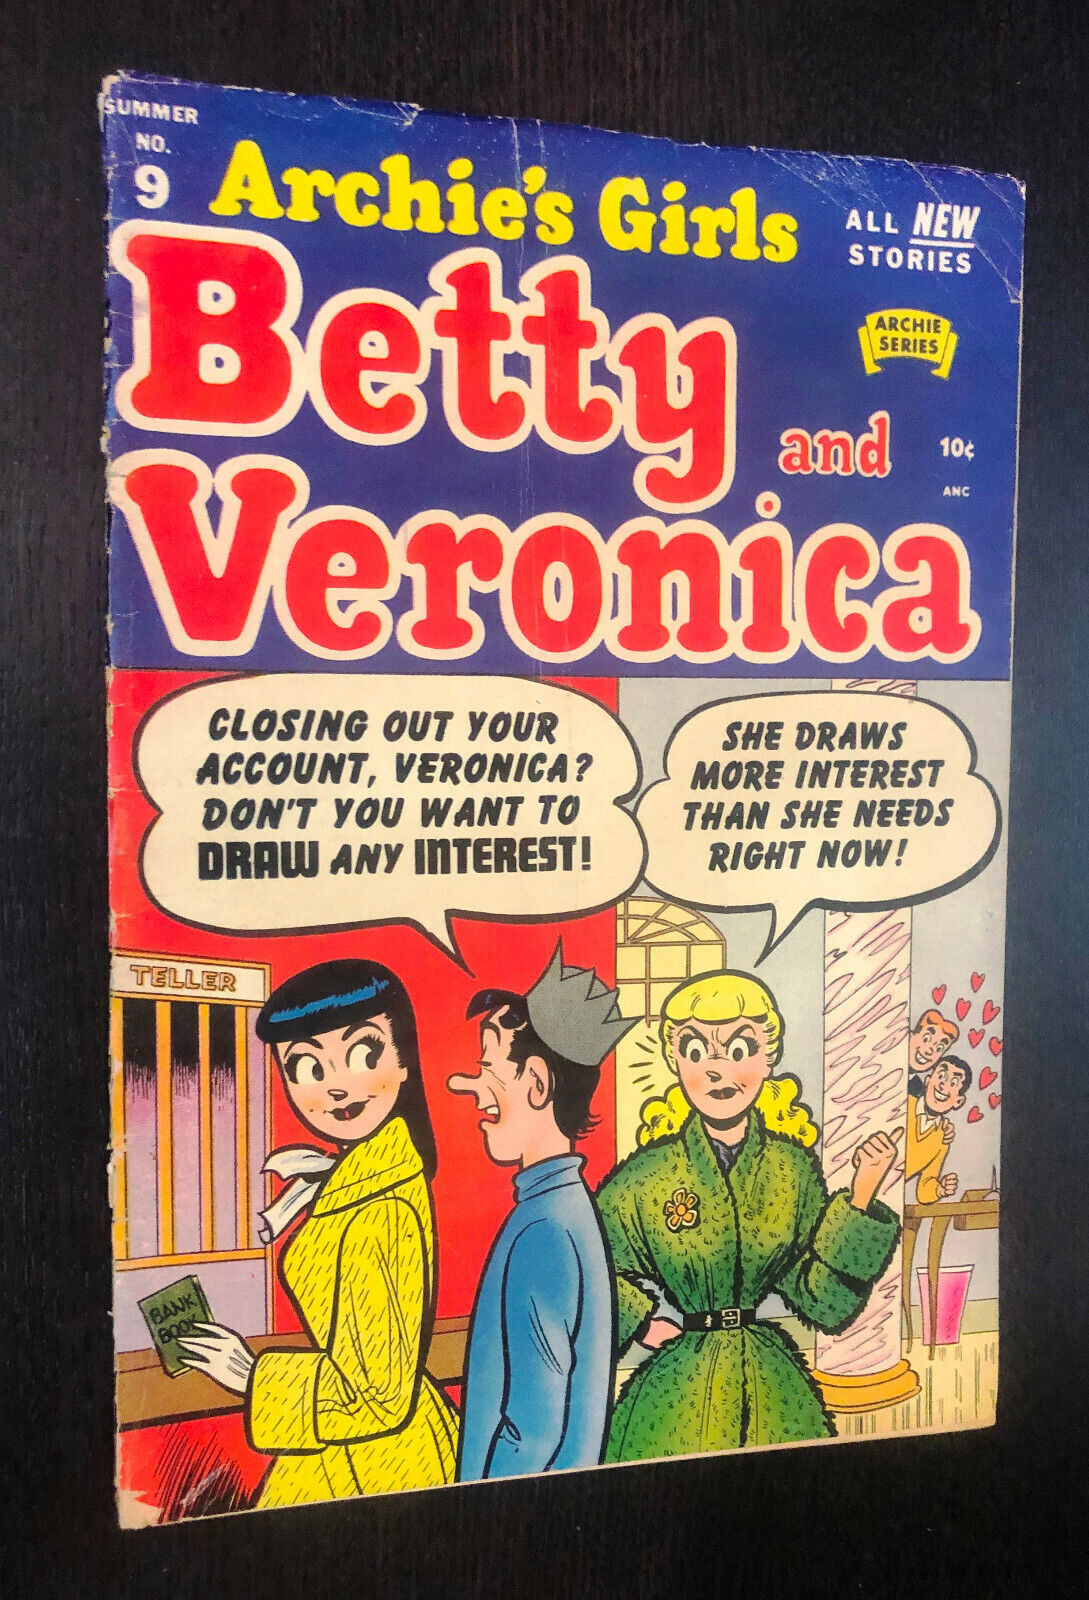 ARCHIE\'S GIRLS BETTY AND VERONICA #9 -- 1953 -- Good -- Golden Age Humor